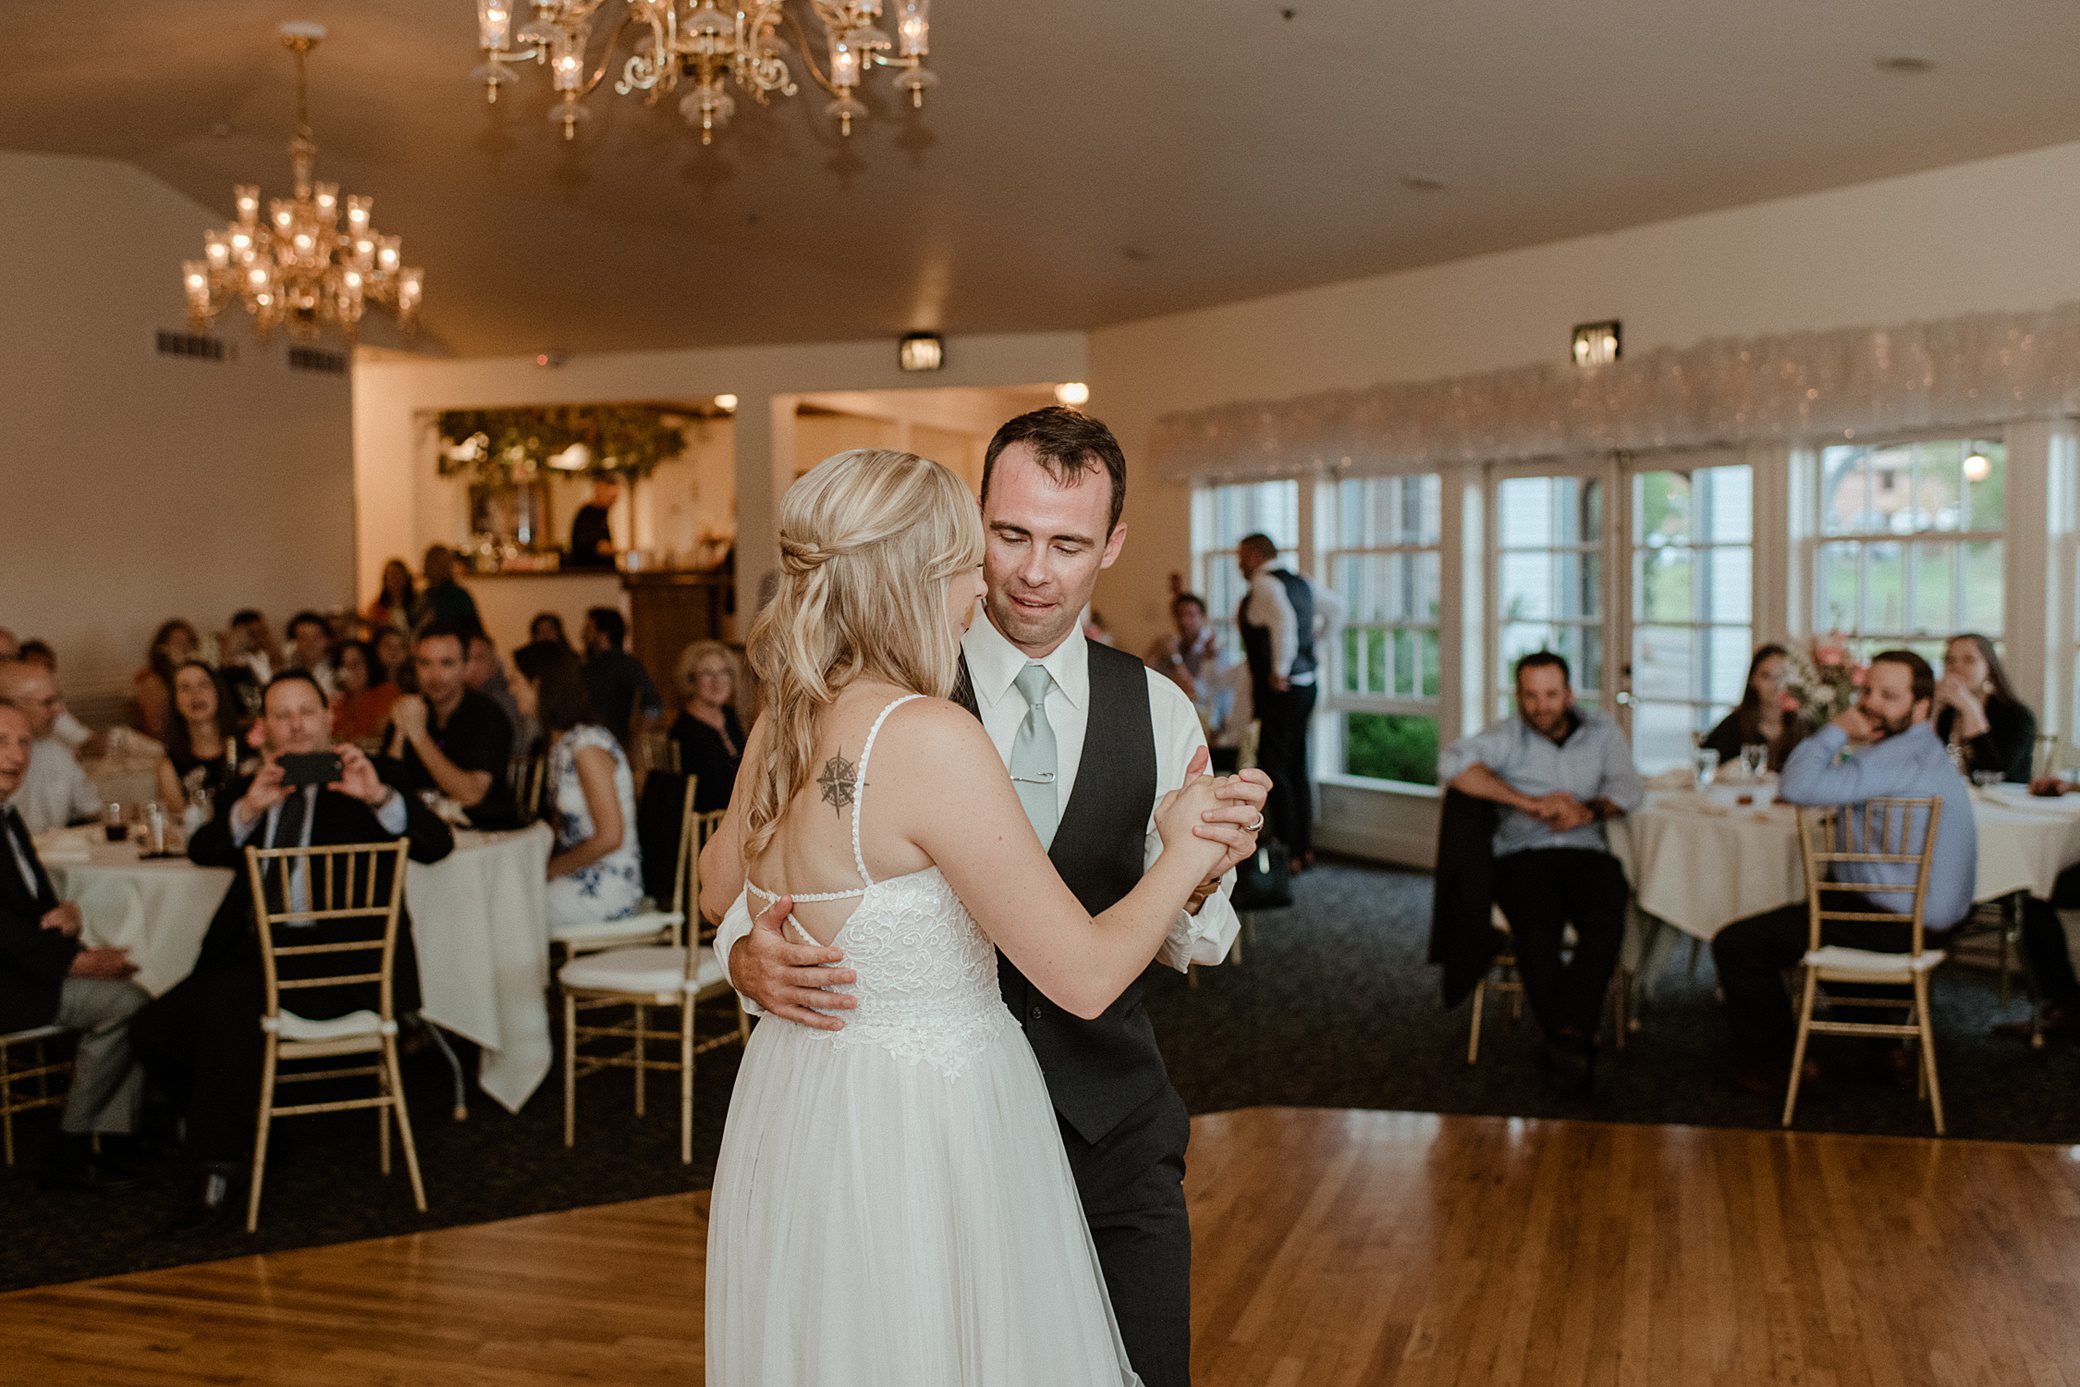 A bride and groom have their first dance at Willow Ridge Manor wedding venue in Morrison, CO